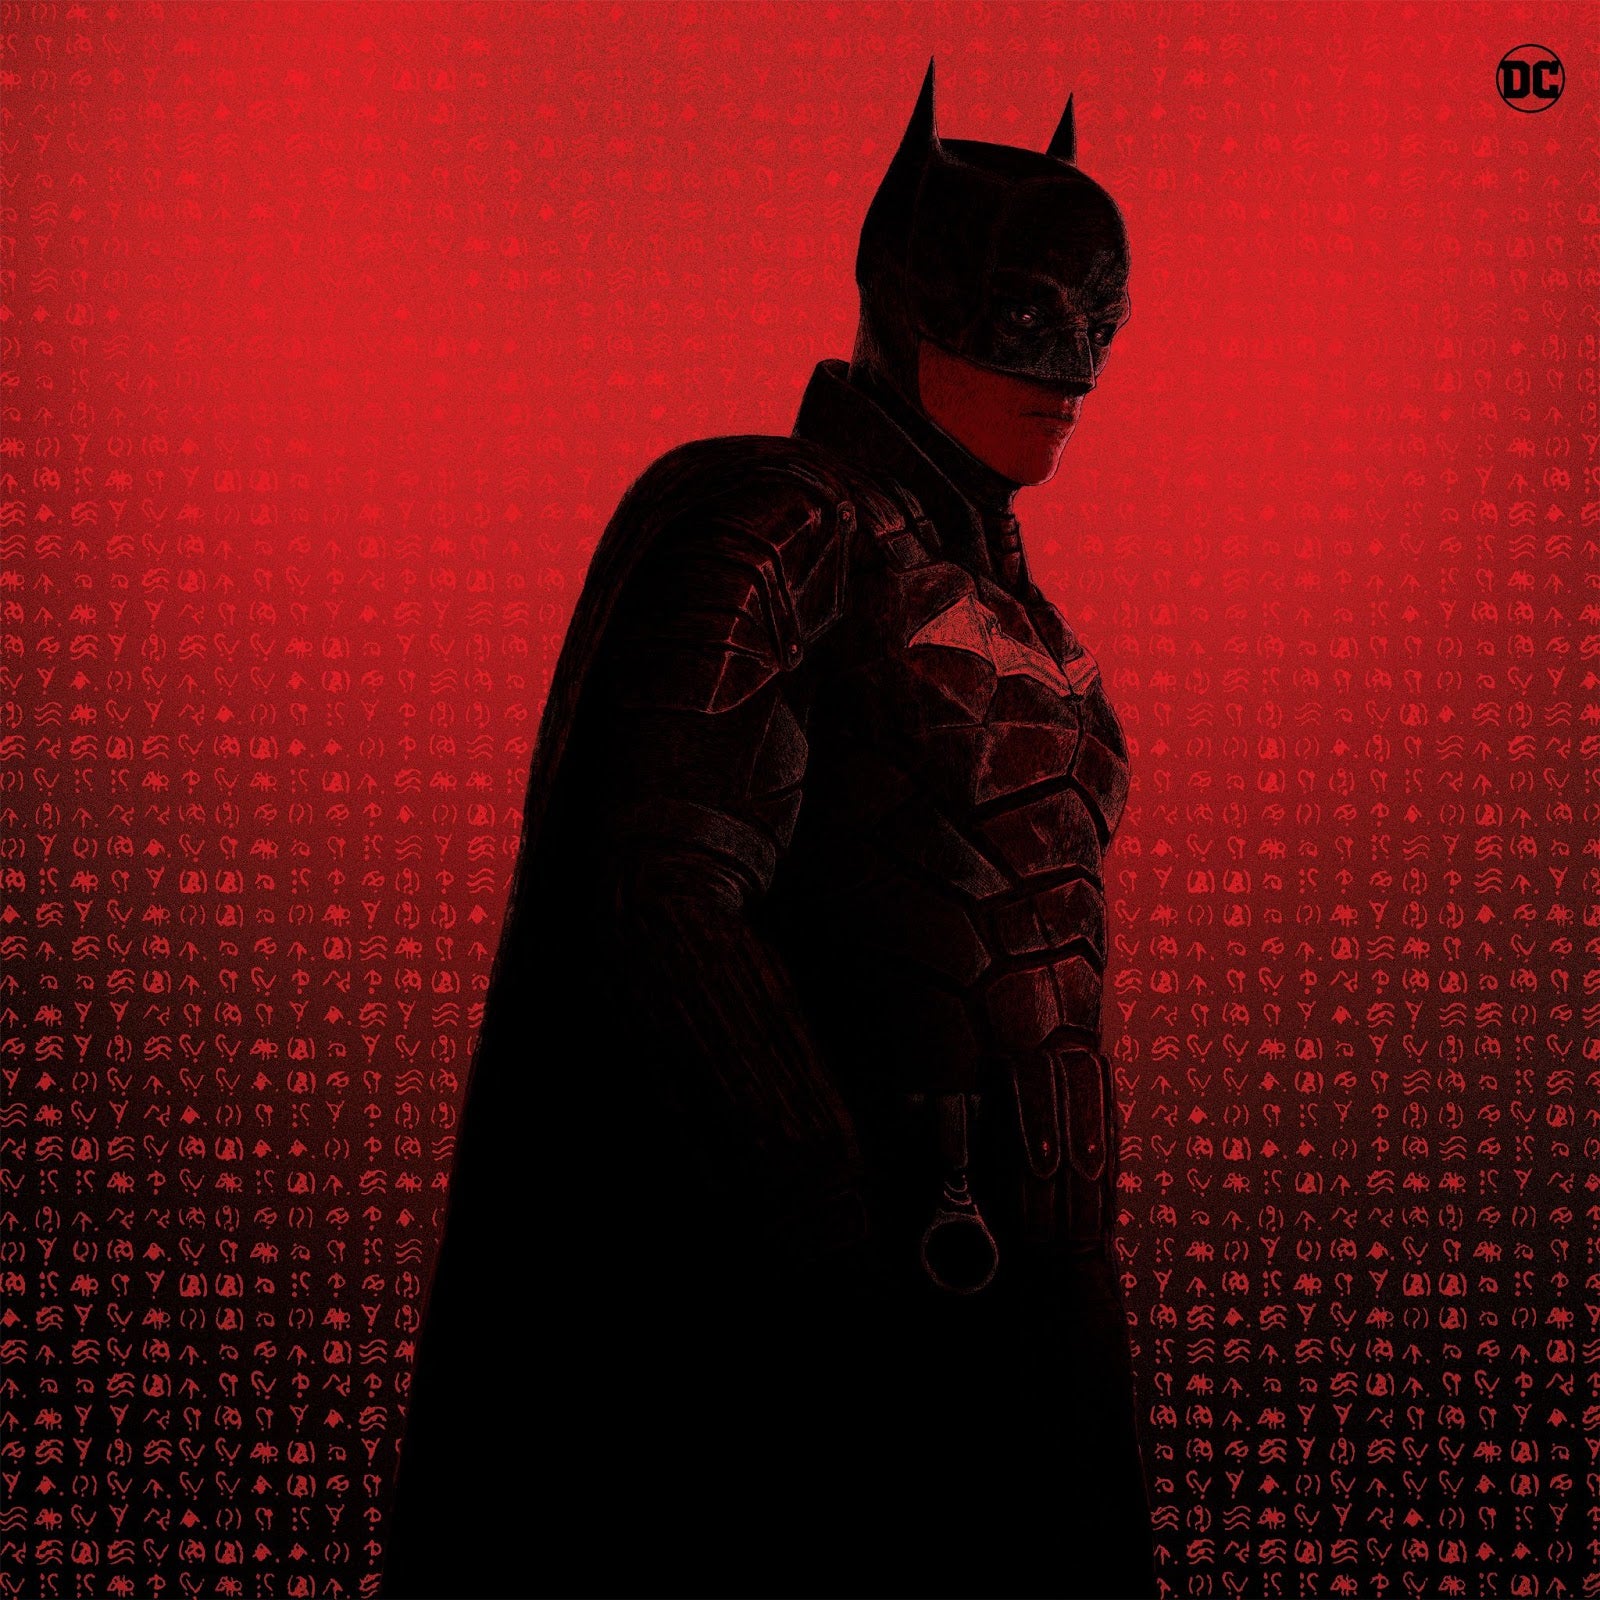 Download Protected By The Batman Wallpaper